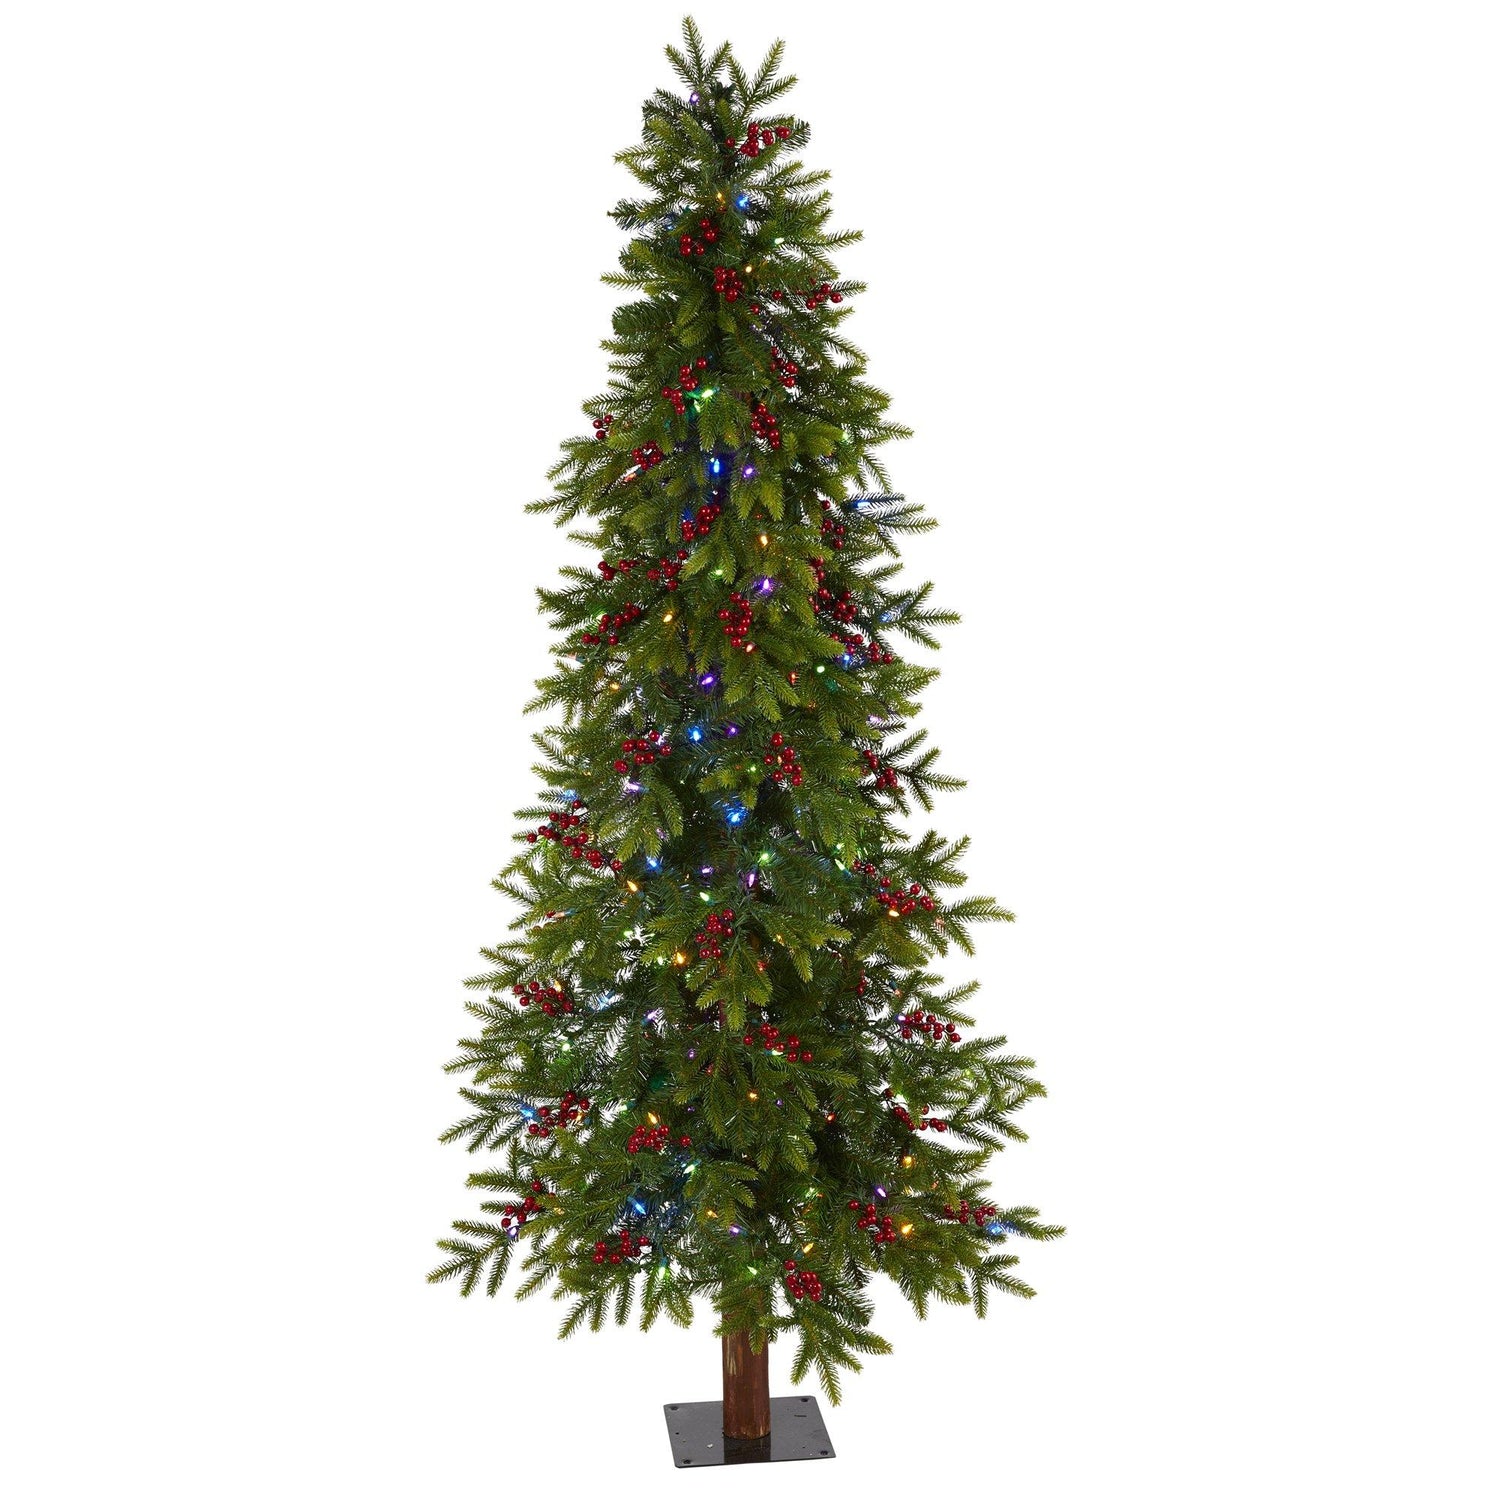 6' Victoria Fir Artificial Christmas Tree with 250 Multi-Color (Multifunction) LED Lights, Berries and 415 Bendable Branches